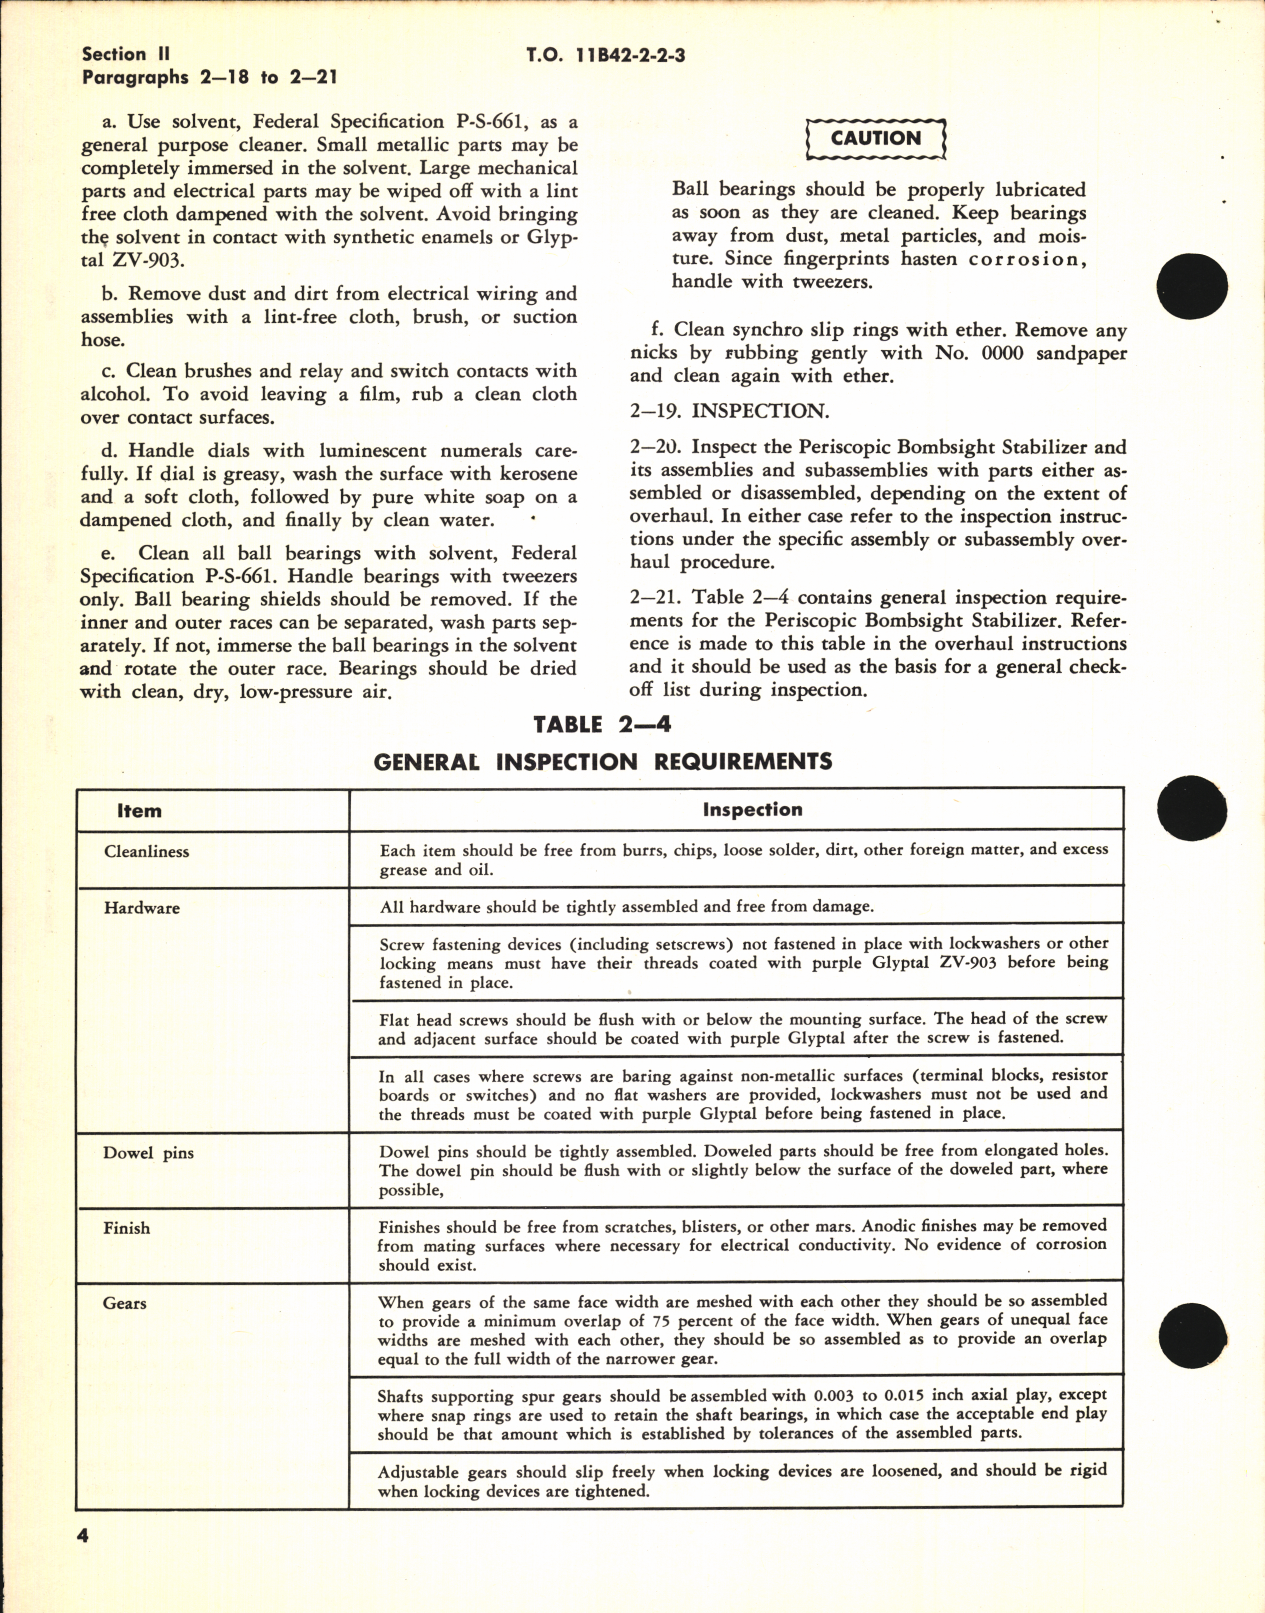 Sample page 6 from AirCorps Library document: Overhaul Instructions for Periscopic Bombsight Stabilizer Type B-1